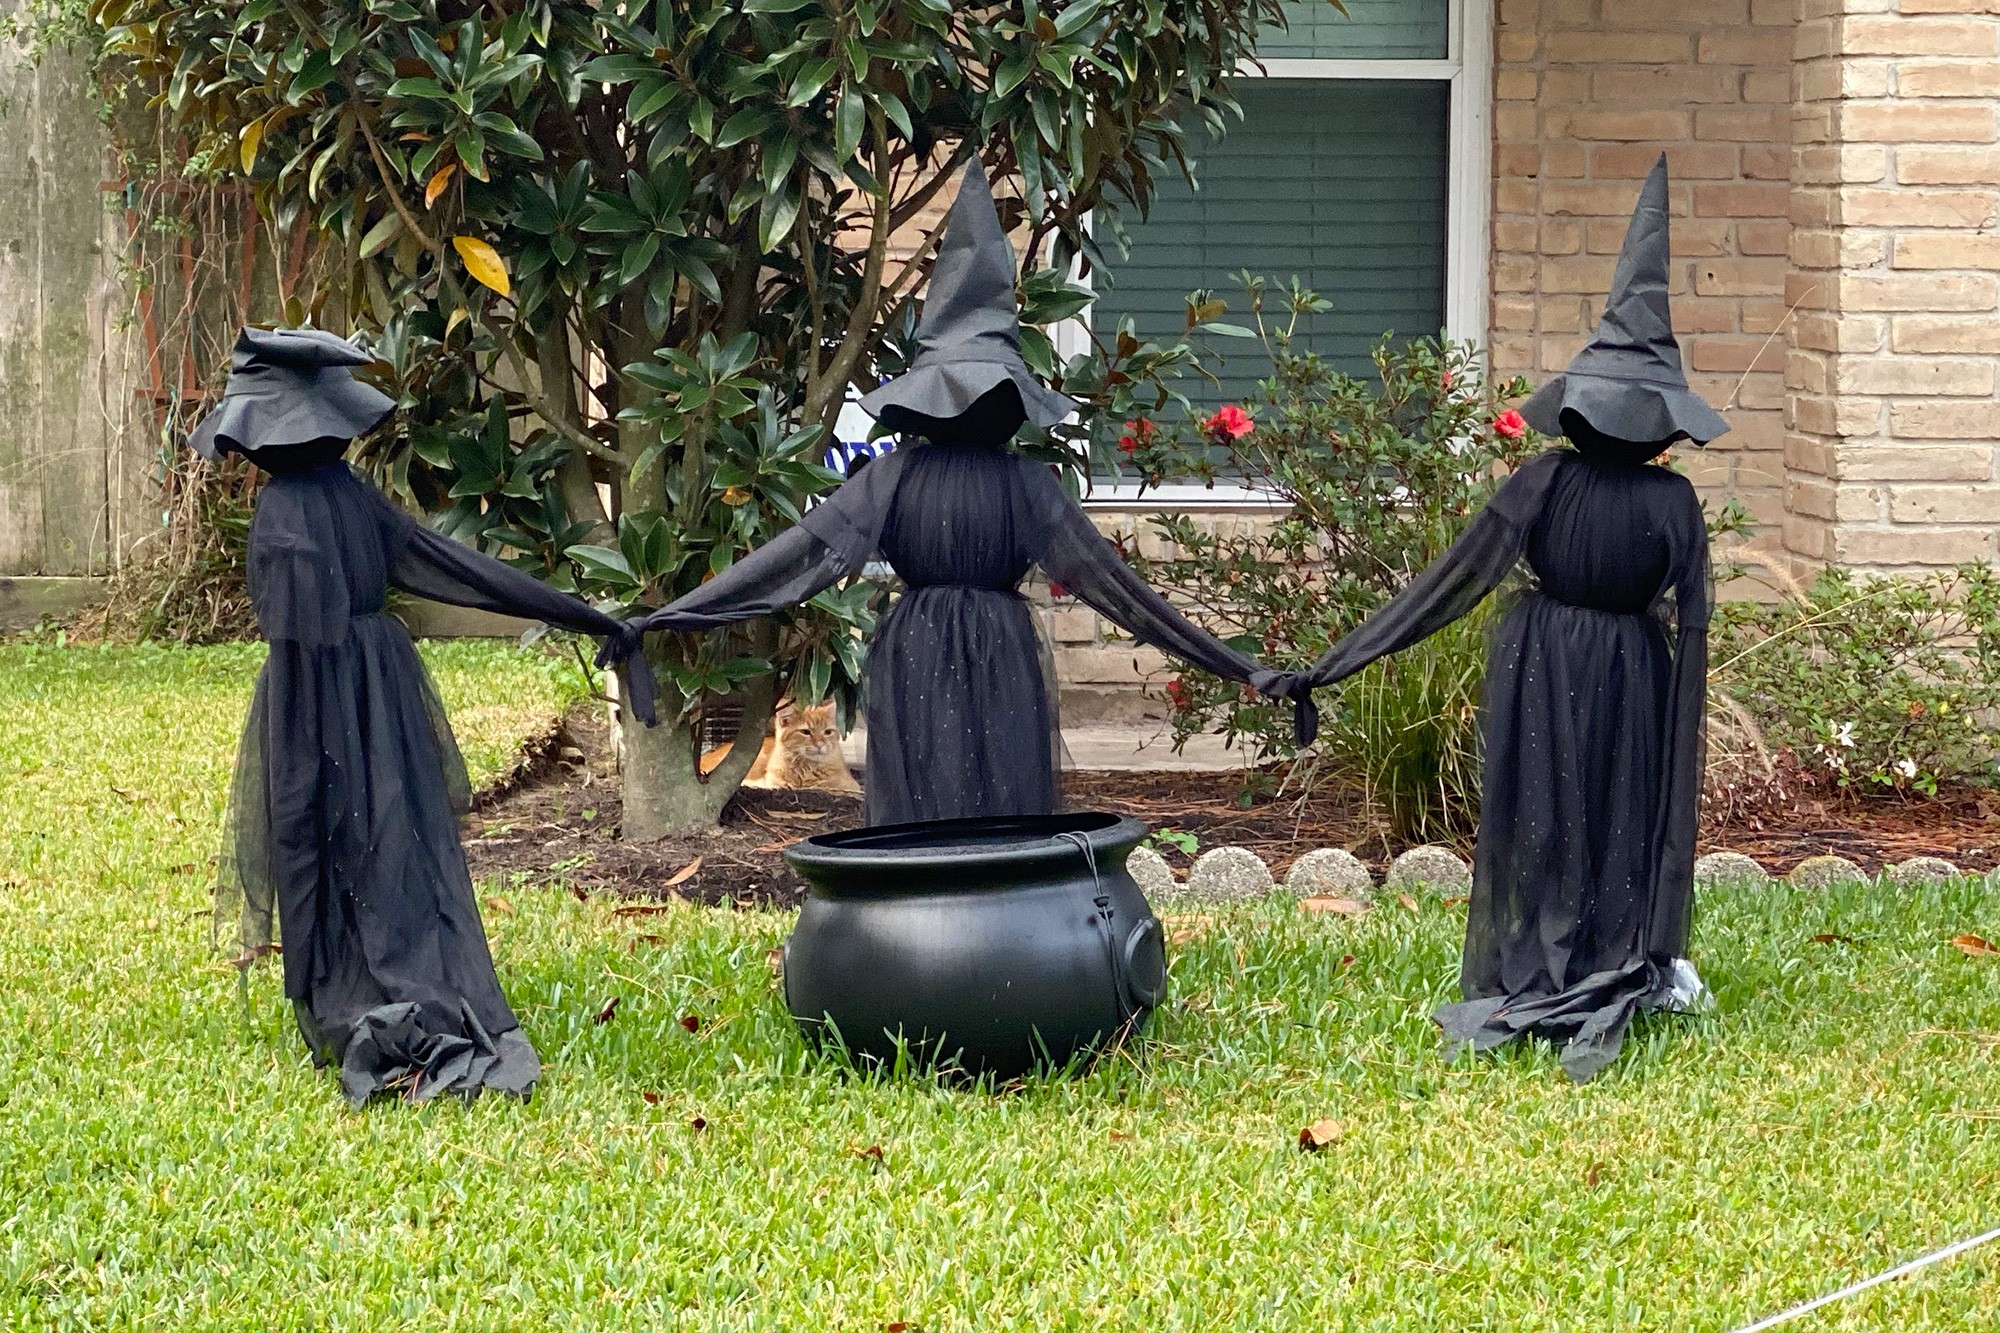 Houston's 2020 Halloween Decorations Are Scaring the Crap Out of Us ...